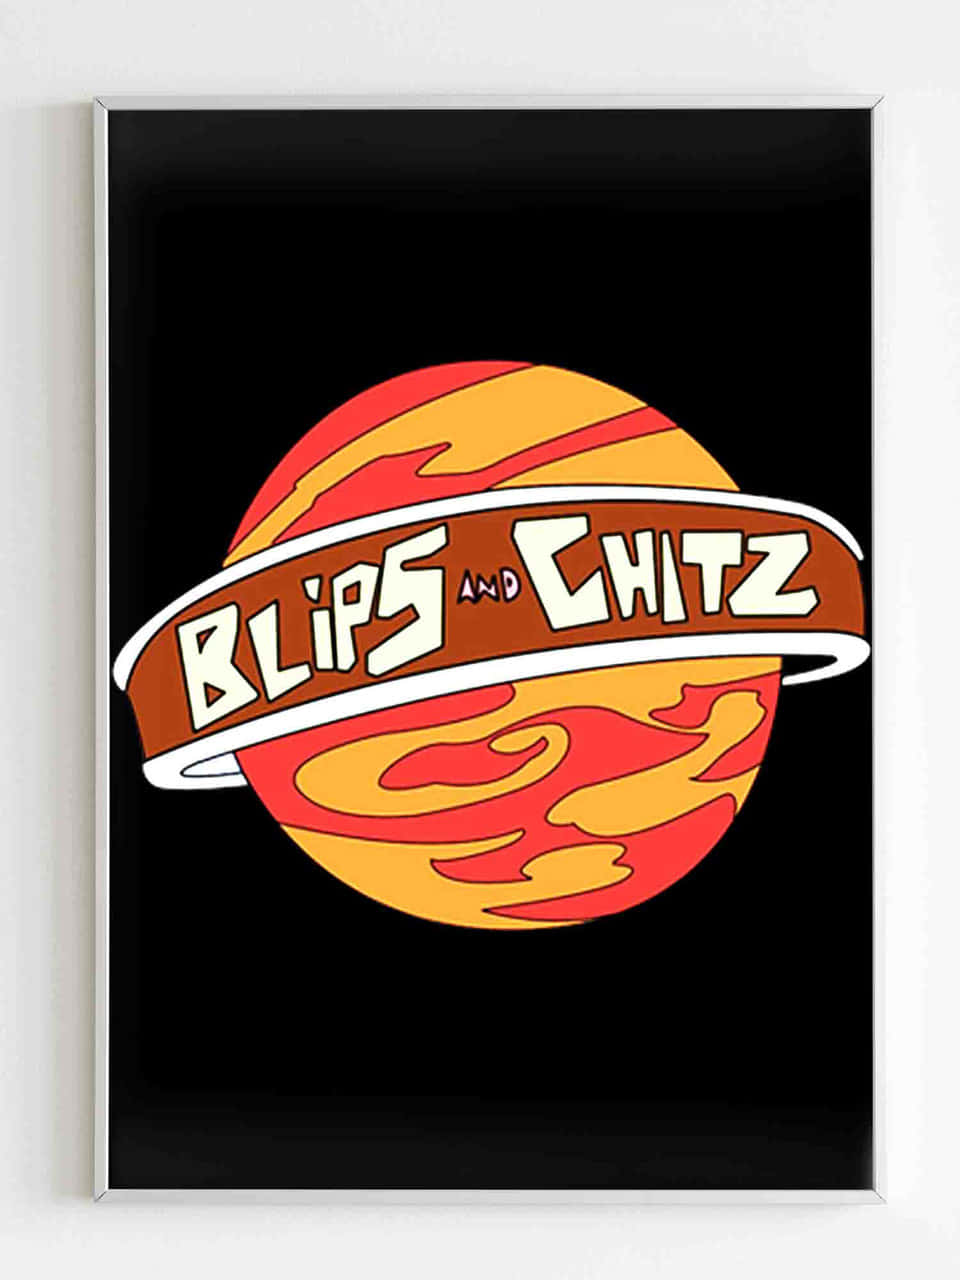 Welcome to the ultimate gaming experience at Blips and Chitz! Wallpaper